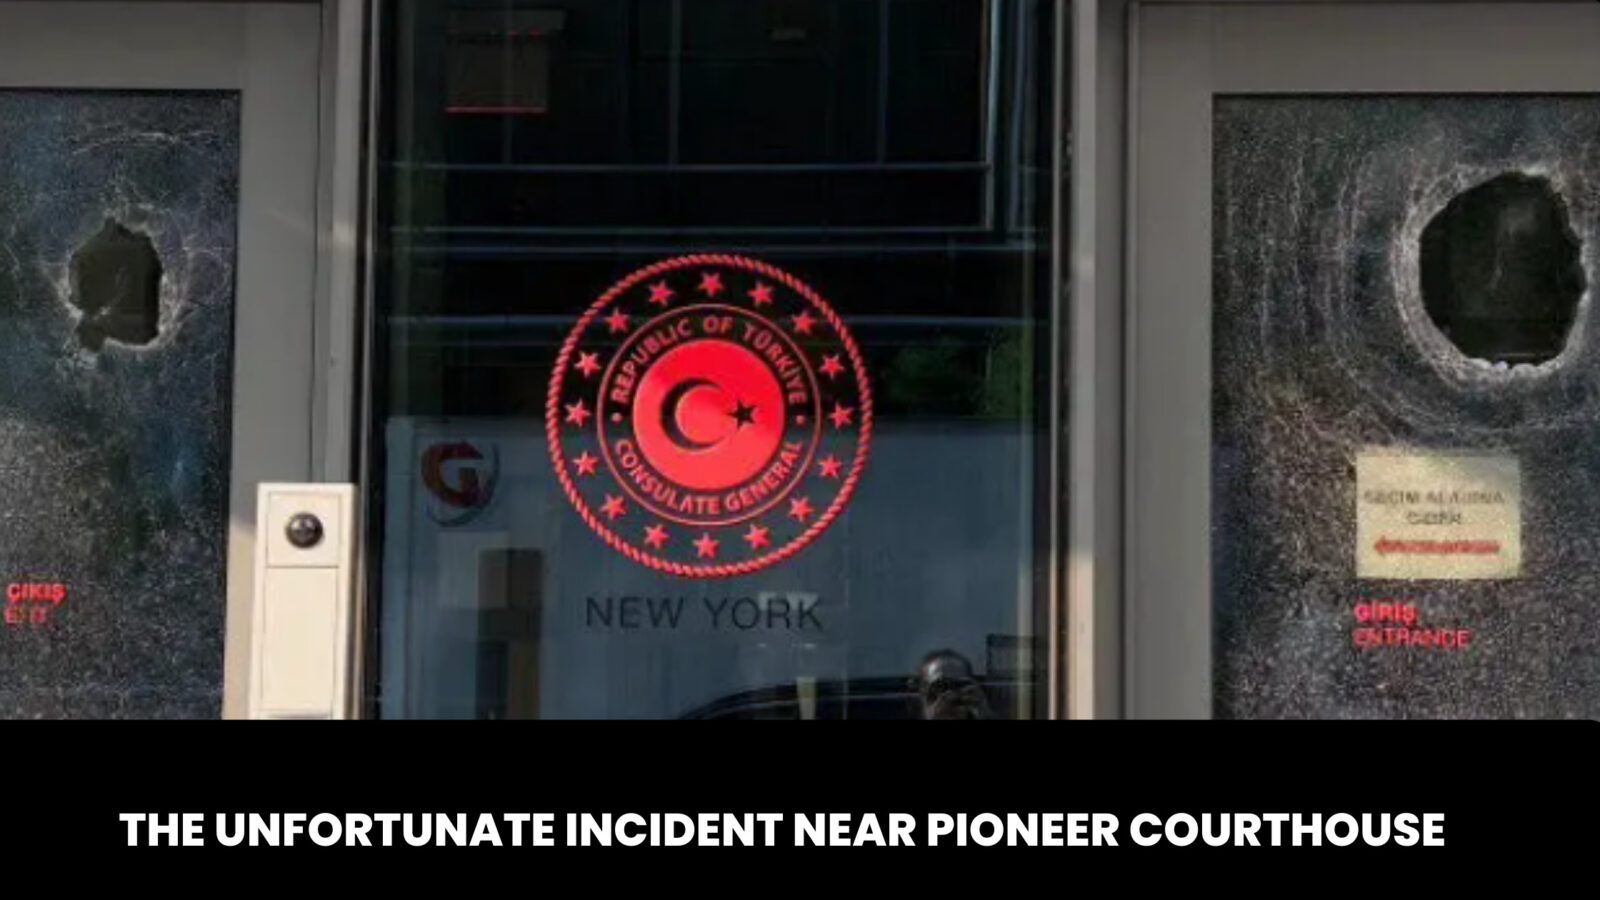 The Unfortunate Incident Near Pioneer Courthouse